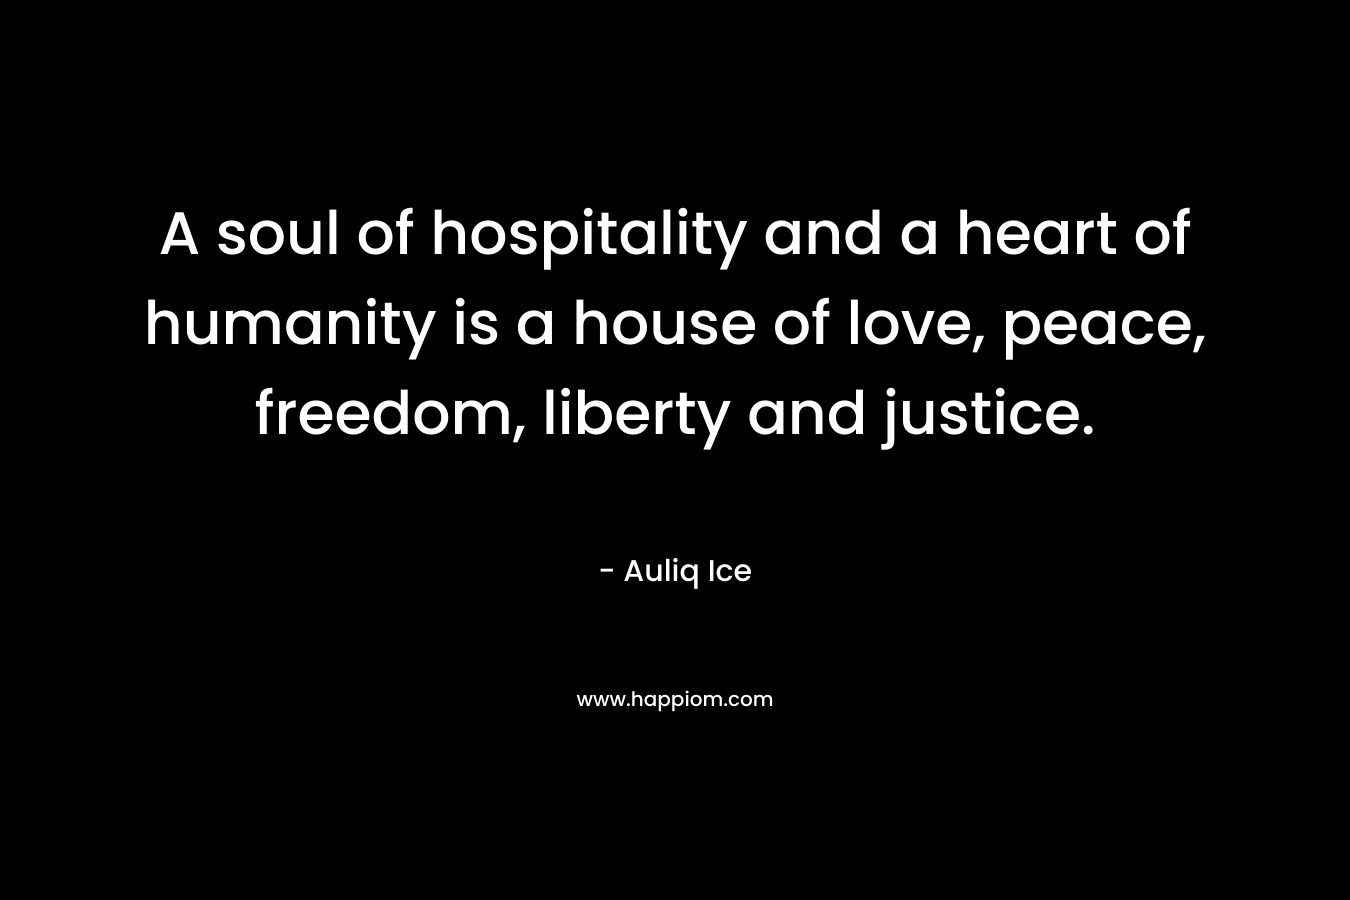 A soul of hospitality and a heart of humanity is a house of love, peace, freedom, liberty and justice.